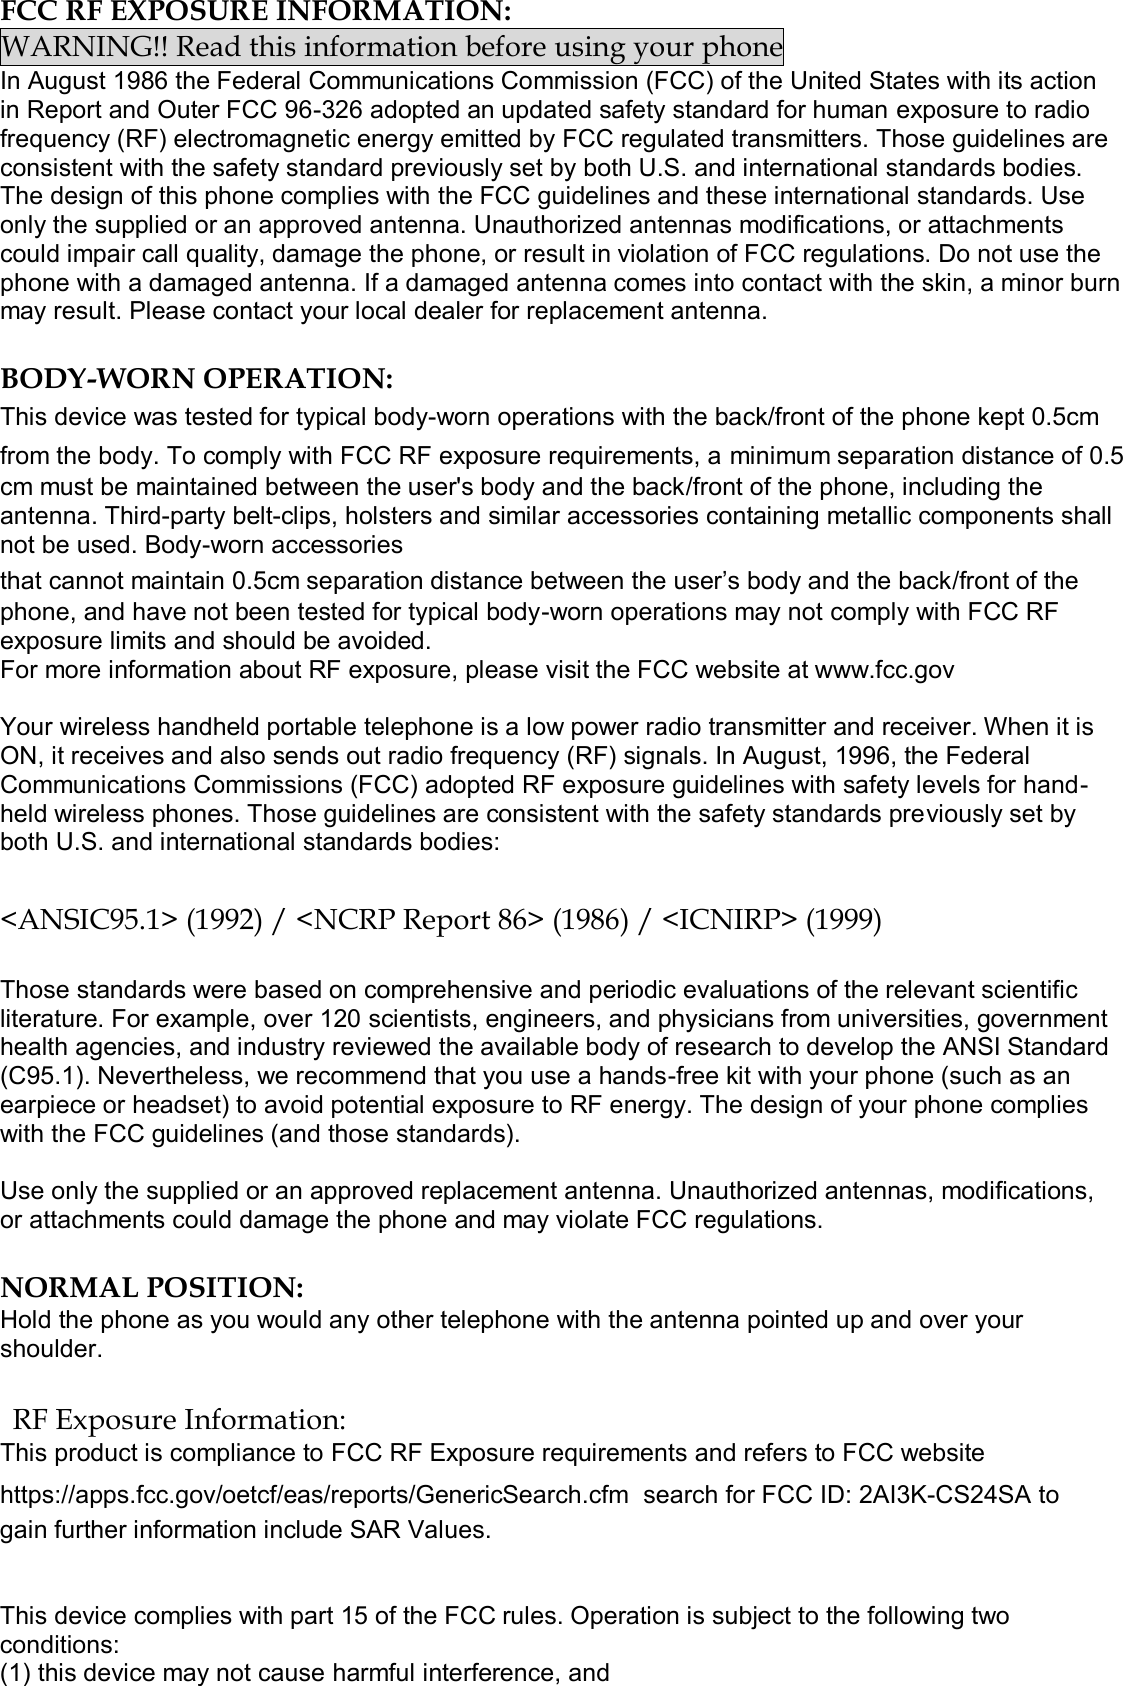  FCC RF EXPOSURE INFORMATION: WARNING!! Read this information before using your phone In August 1986 the Federal Communications Commission (FCC) of the United States with its action in Report and Outer FCC 96-326 adopted an updated safety standard for human exposure to radio frequency (RF) electromagnetic energy emitted by FCC regulated transmitters. Those guidelines are consistent with the safety standard previously set by both U.S. and international standards bodies. The design of this phone complies with the FCC guidelines and these international standards. Use only the supplied or an approved antenna. Unauthorized antennas modifications, or attachments could impair call quality, damage the phone, or result in violation of FCC regulations. Do not use the phone with a damaged antenna. If a damaged antenna comes into contact with the skin, a minor burn may result. Please contact your local dealer for replacement antenna.  BODY-WORN OPERATION: This device was tested for typical body-worn operations with the back/front of the phone kept 0.5cm from the body. To comply with FCC RF exposure requirements, a minimum separation distance of 0.5cm must be maintained between the user&apos;s body and the back/front of the phone, including the antenna. Third-party belt-clips, holsters and similar accessories containing metallic components shall not be used. Body-worn accessories that cannot maintain 0.5cm separation distance between the user’s body and the back/front of the phone, and have not been tested for typical body-worn operations may not comply with FCC RF exposure limits and should be avoided. For more information about RF exposure, please visit the FCC website at www.fcc.gov  Your wireless handheld portable telephone is a low power radio transmitter and receiver. When it is ON, it receives and also sends out radio frequency (RF) signals. In August, 1996, the Federal Communications Commissions (FCC) adopted RF exposure guidelines with safety levels for hand-held wireless phones. Those guidelines are consistent with the safety standards previously set by both U.S. and international standards bodies:  &lt;ANSIC95.1&gt; (1992) / &lt;NCRP Report 86&gt; (1986) / &lt;ICNIRP&gt; (1999)  Those standards were based on comprehensive and periodic evaluations of the relevant scientific literature. For example, over 120 scientists, engineers, and physicians from universities, government health agencies, and industry reviewed the available body of research to develop the ANSI Standard (C95.1). Nevertheless, we recommend that you use a hands-free kit with your phone (such as an earpiece or headset) to avoid potential exposure to RF energy. The design of your phone complies with the FCC guidelines (and those standards).  Use only the supplied or an approved replacement antenna. Unauthorized antennas, modifications, or attachments could damage the phone and may violate FCC regulations.   NORMAL POSITION:  Hold the phone as you would any other telephone with the antenna pointed up and over your shoulder.  RF Exposure Information: This product is compliance to FCC RF Exposure requirements and refers to FCC website https://apps.fcc.gov/oetcf/eas/reports/GenericSearch.cfm  search for FCC ID: 2AI3K-CS24SA to gain further information include SAR Values.    This device complies with part 15 of the FCC rules. Operation is subject to the following two conditions: (1) this device may not cause harmful interference, and 